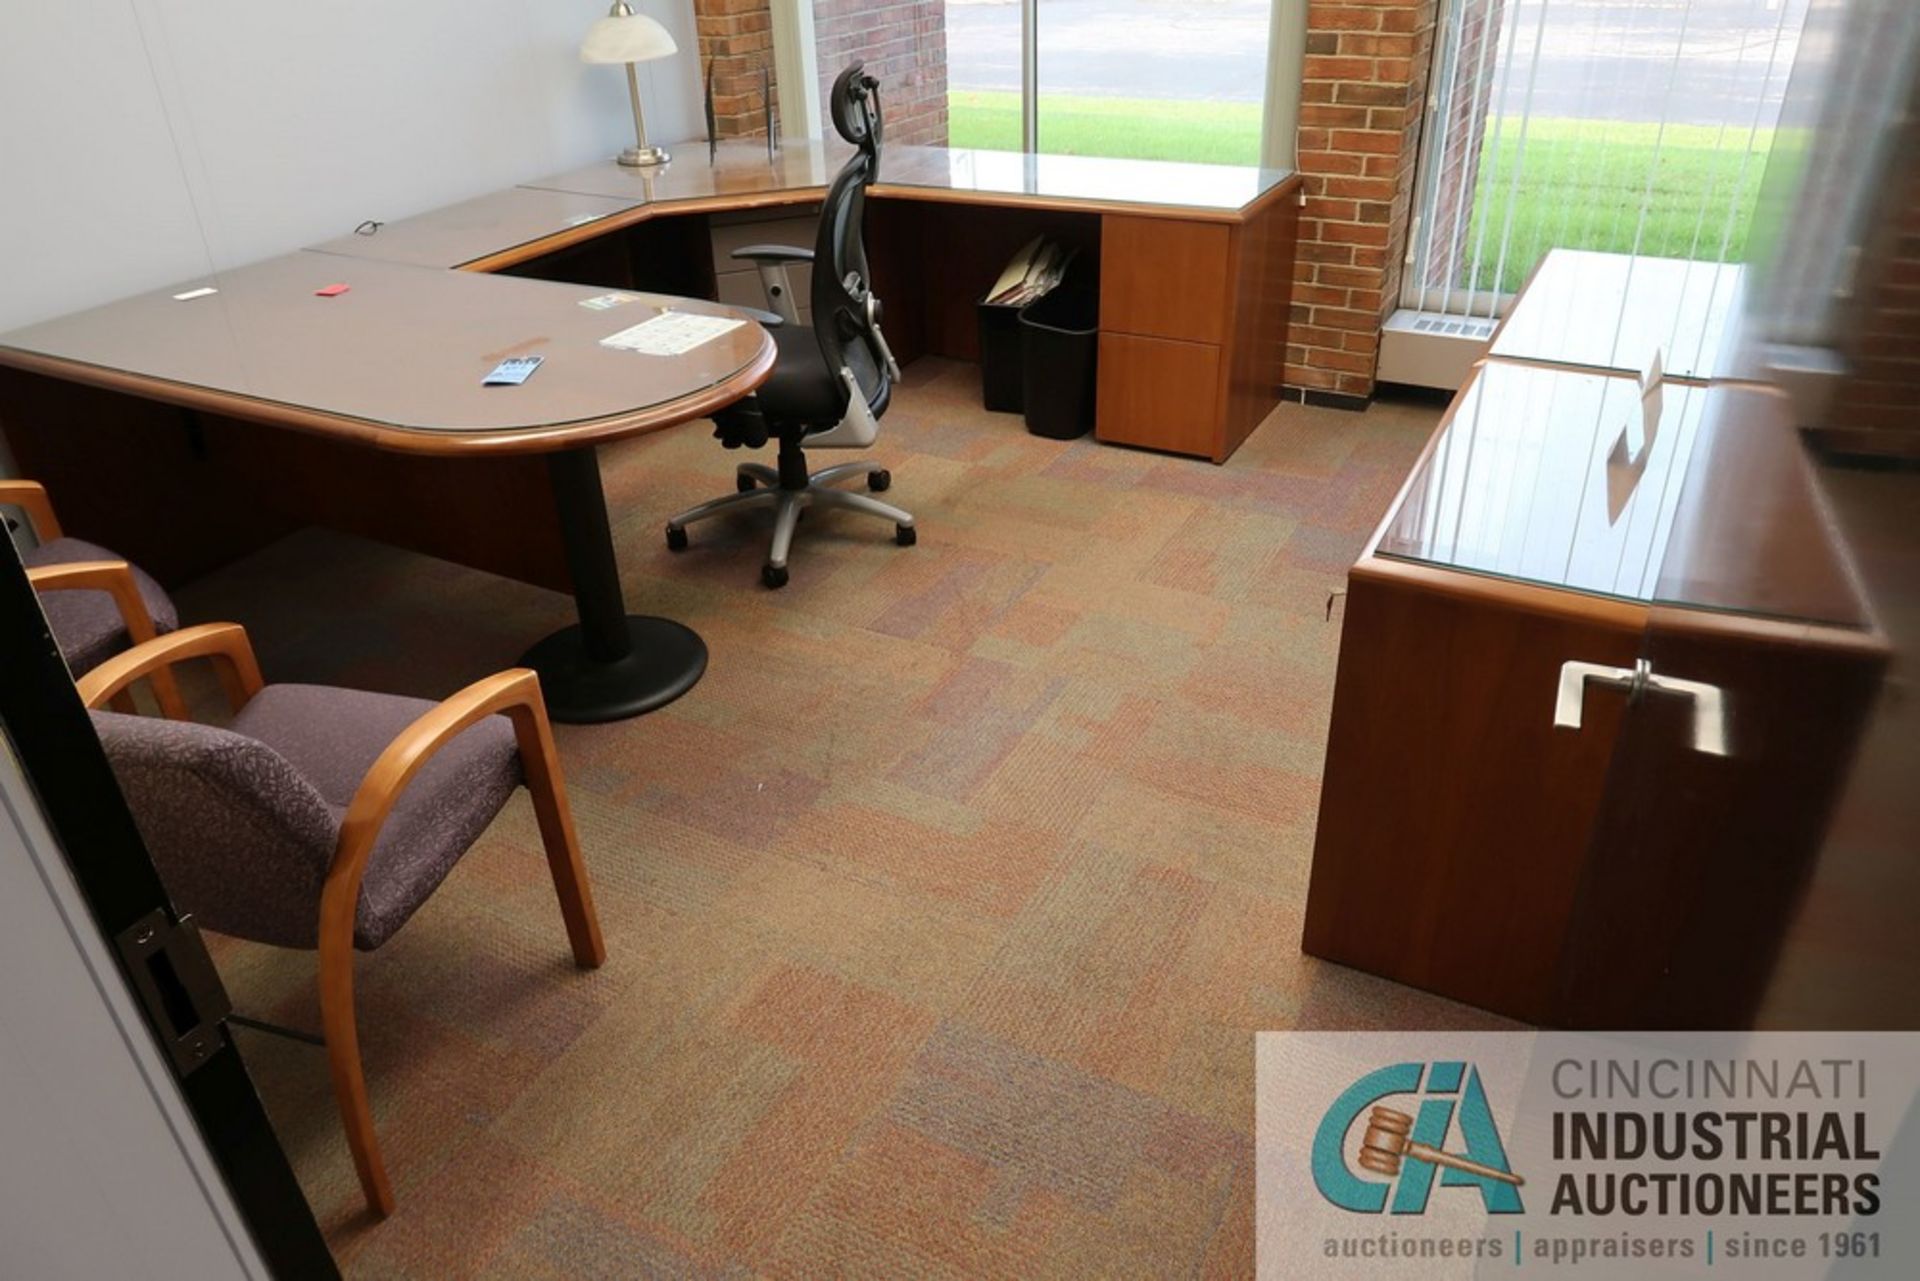 (LOT) CONTENTS OF OFFICE INCLUDES U-SHAPED DESK WITH (2) 2-DRAWER CABINETS AND (3) CHAIRS - Image 4 of 4